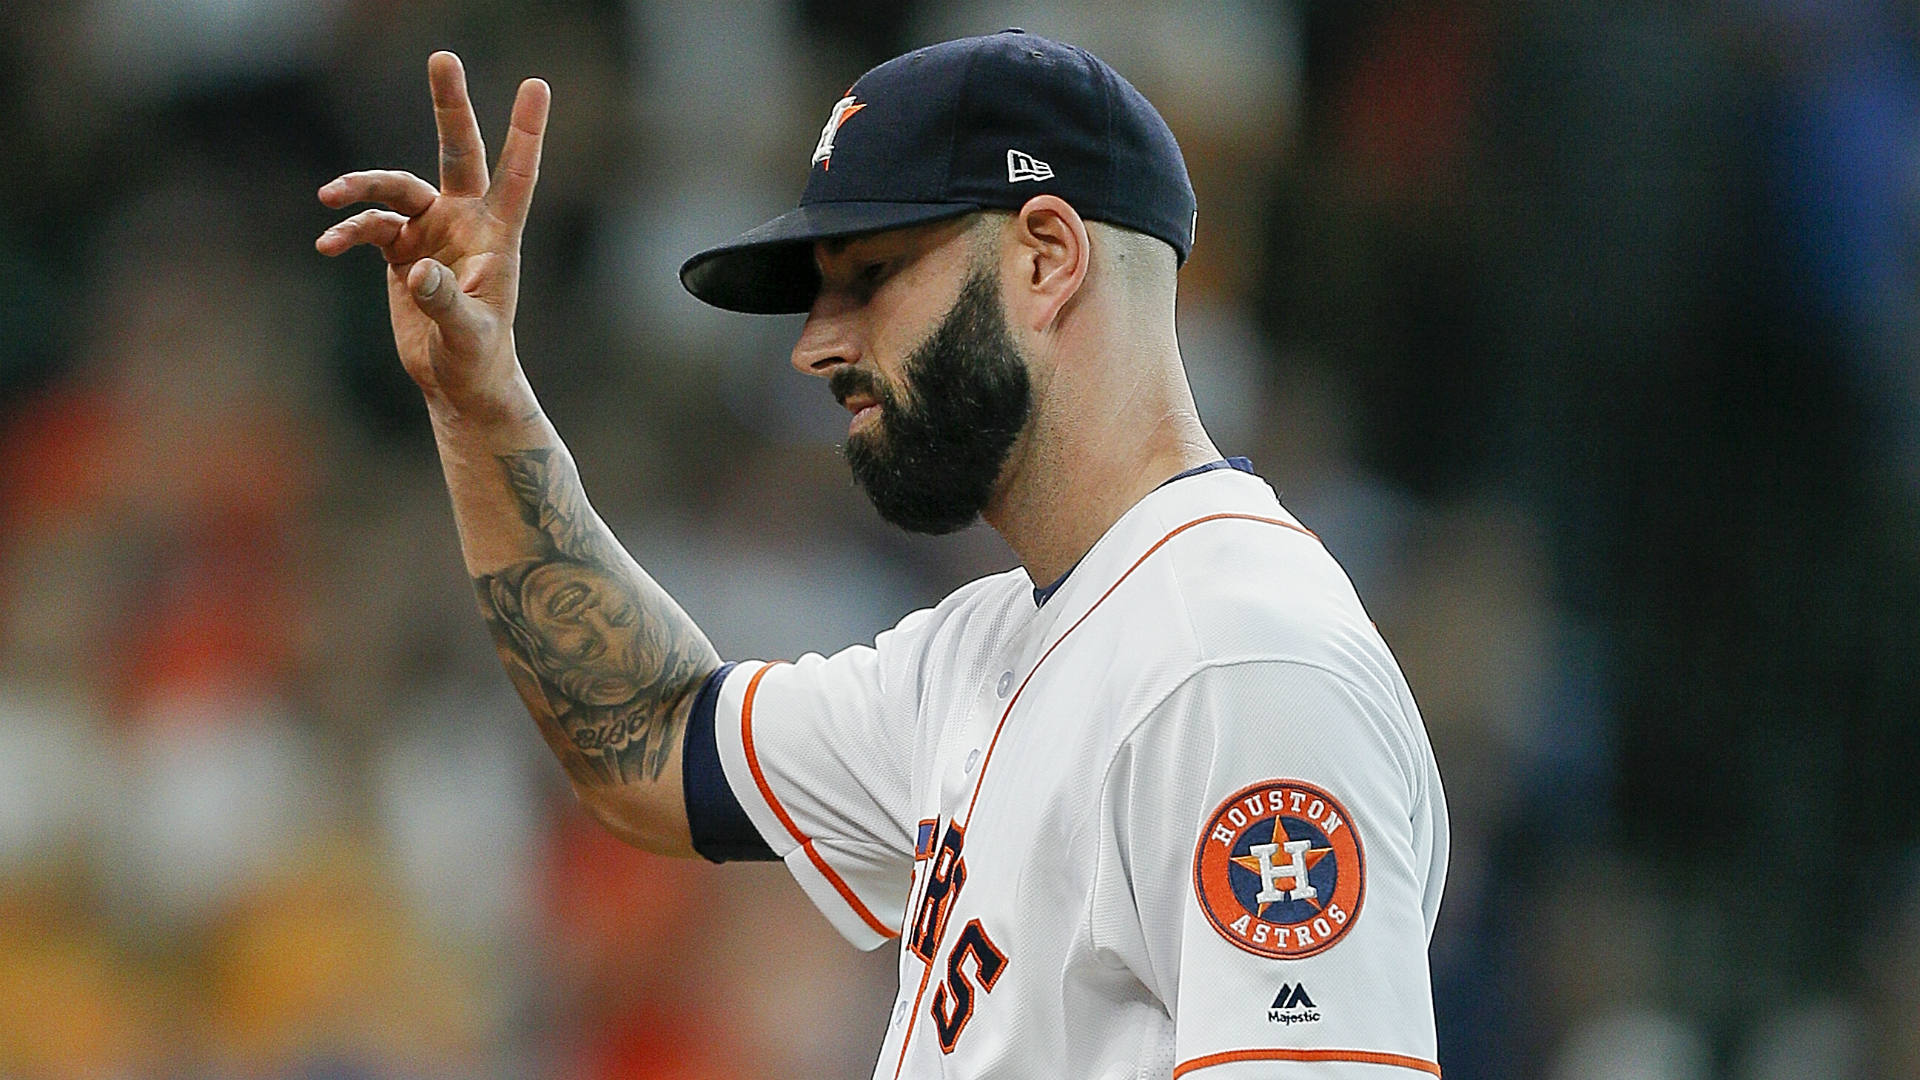 Houston Astros: Former Pitcher Accuses Team of Using Cameras to Steal Signs